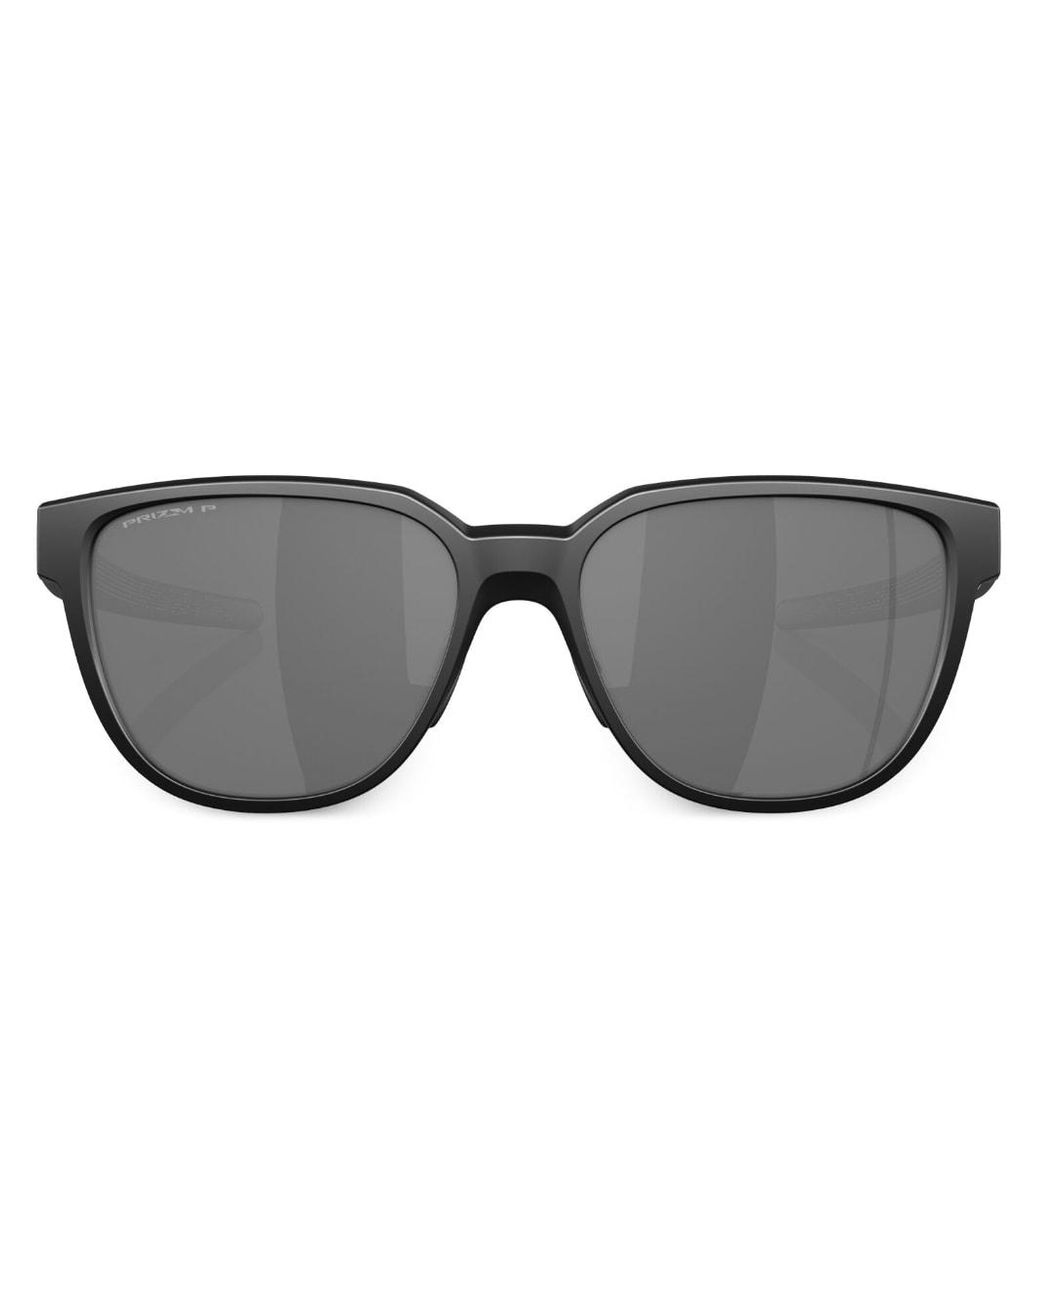 Oakley Actuator Round-frame Sunglasses in Gray | Lyst